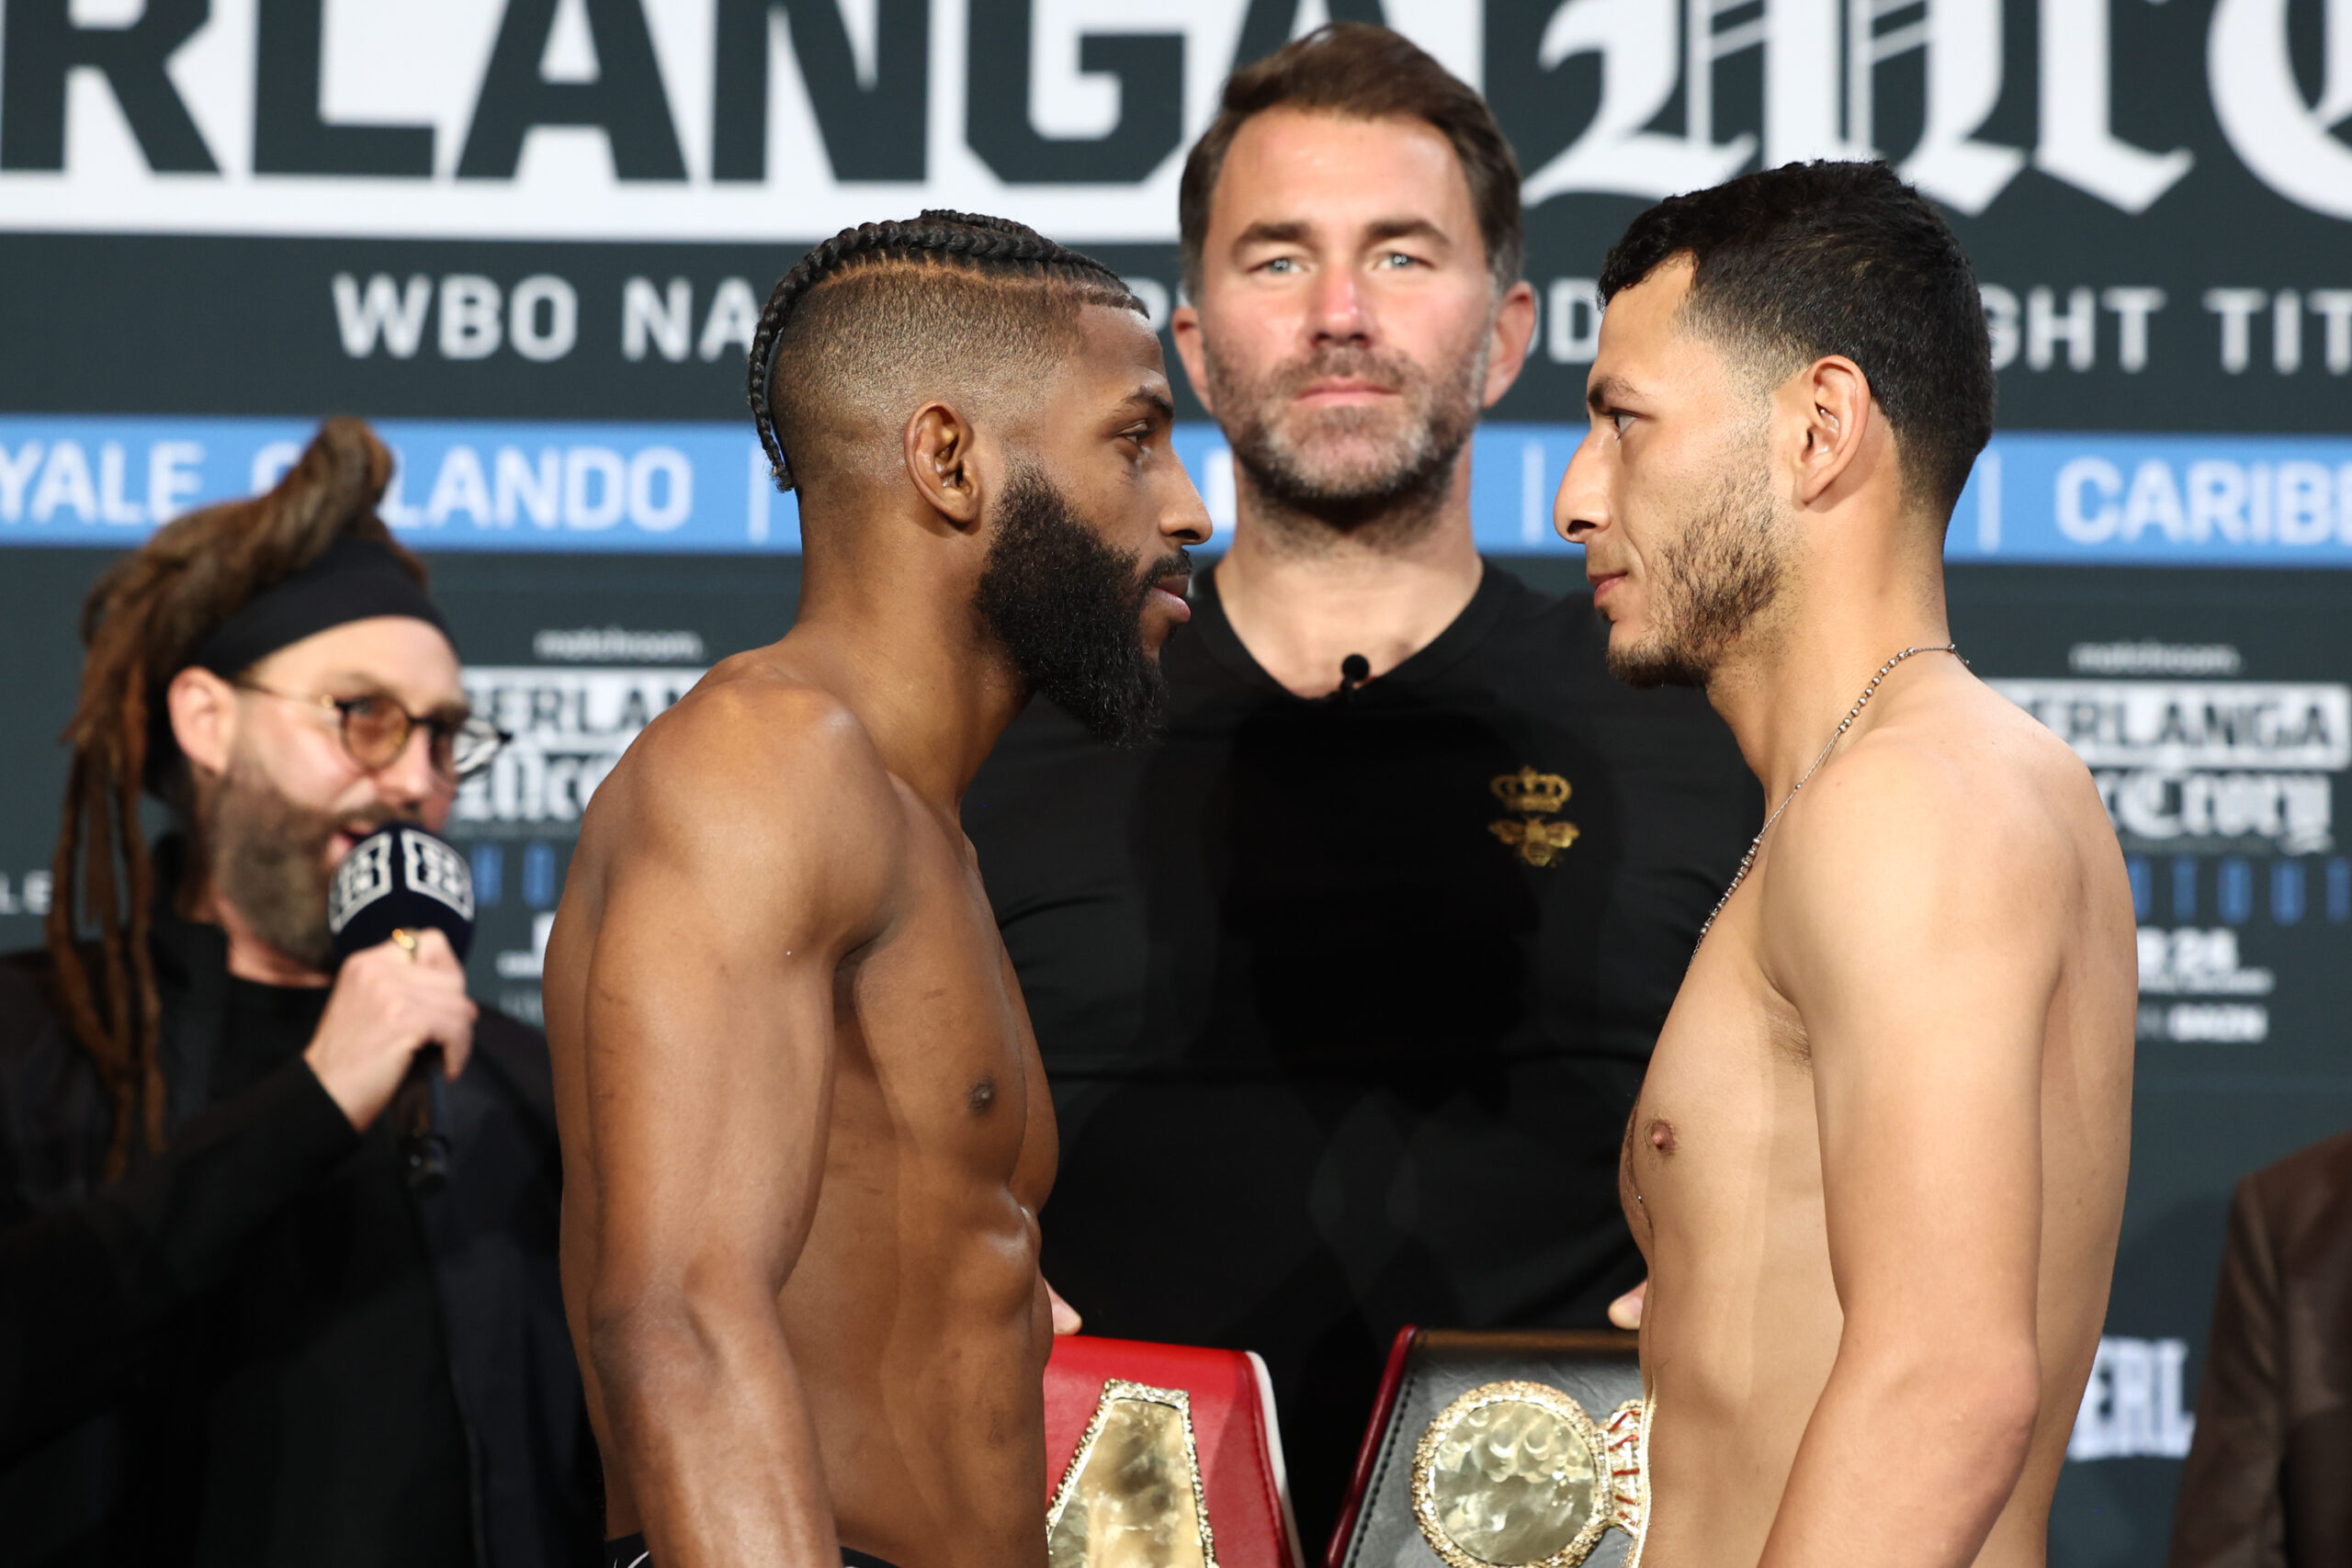 February 23, 2024; Orlando, FL; Andy Cruz and Brayan Zamarripa pose after weighing in for their February 24, 2024 fight at the Caribe Royale Resort in Orlando, FL. Mandatory Credit: Ed Mulholland/Matchroom.